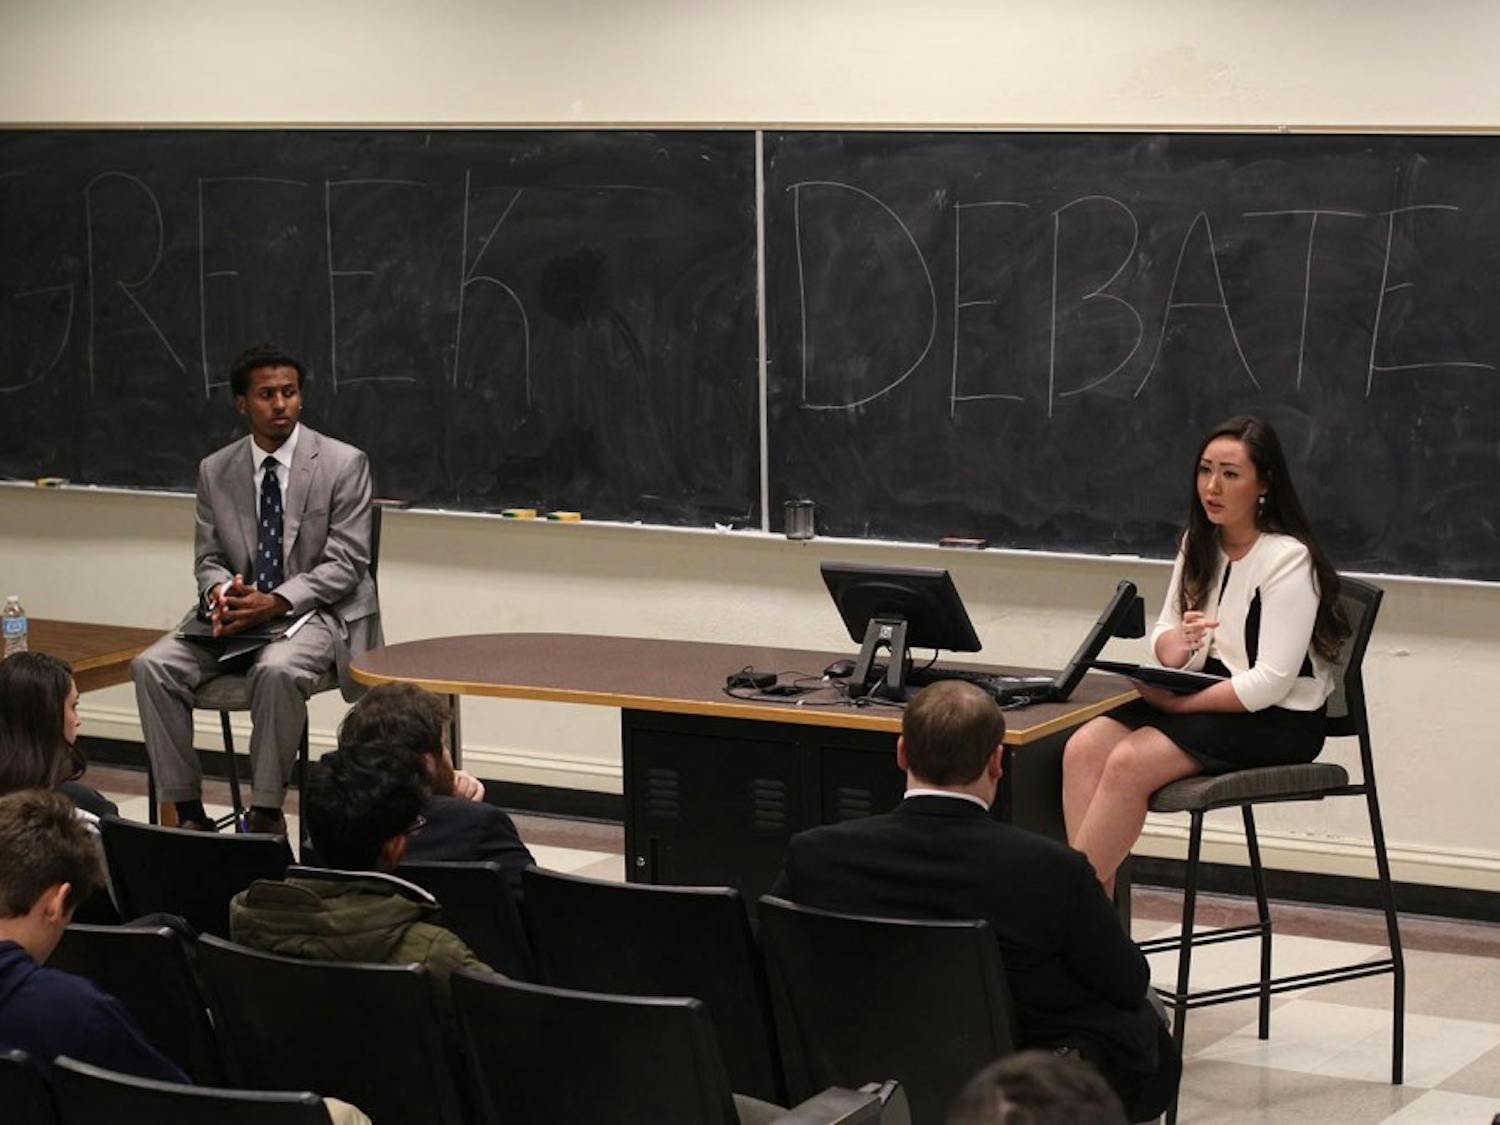 Student body president candidates Maurice Grier (left) and Elizabeth Adkins respond to questions asked by leaders of the Greek Organizations IFC, GAC, NPHC, and the PHC.